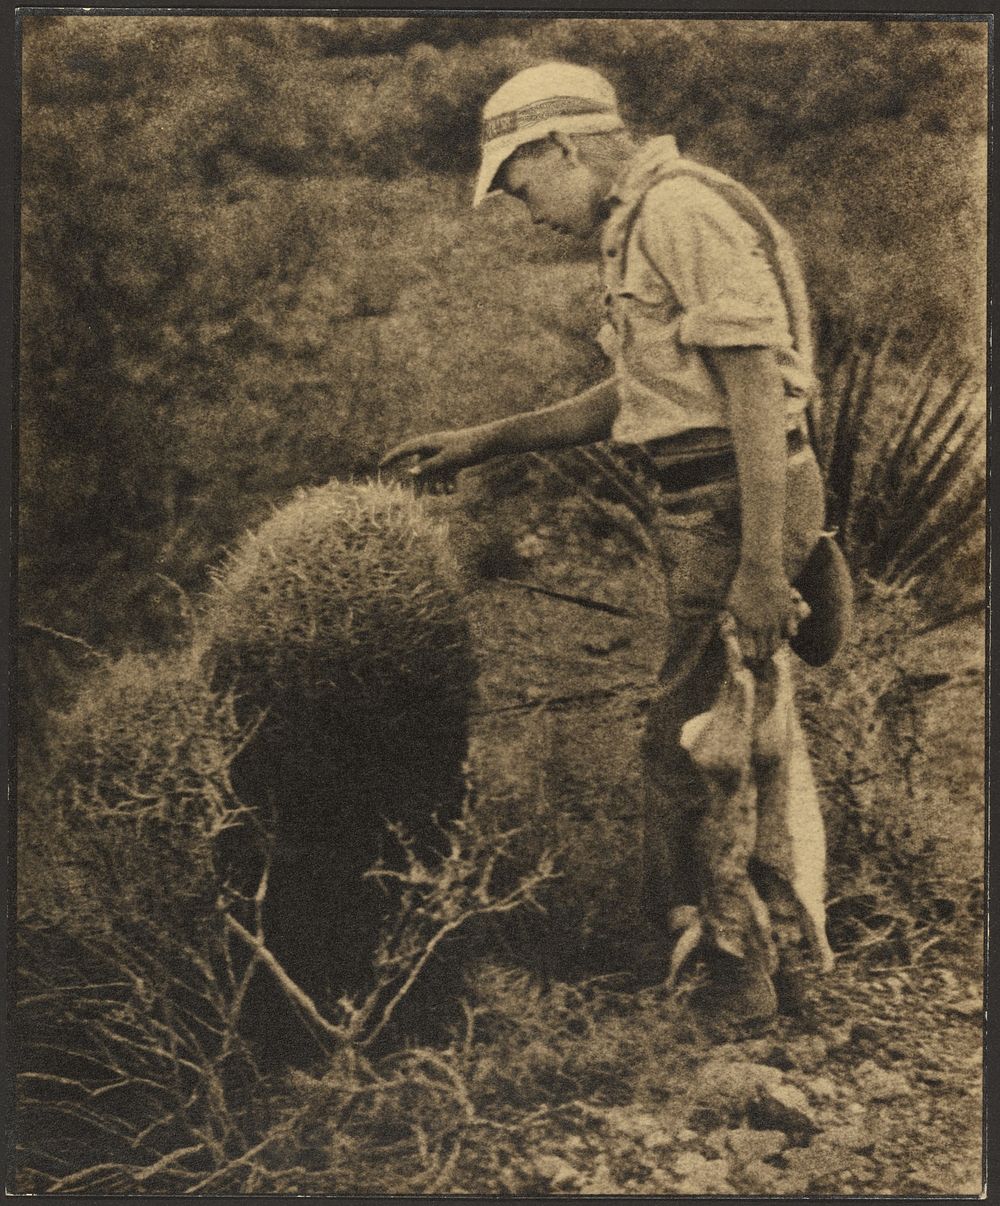 Man with Jack Rabbits by Louis Fleckenstein